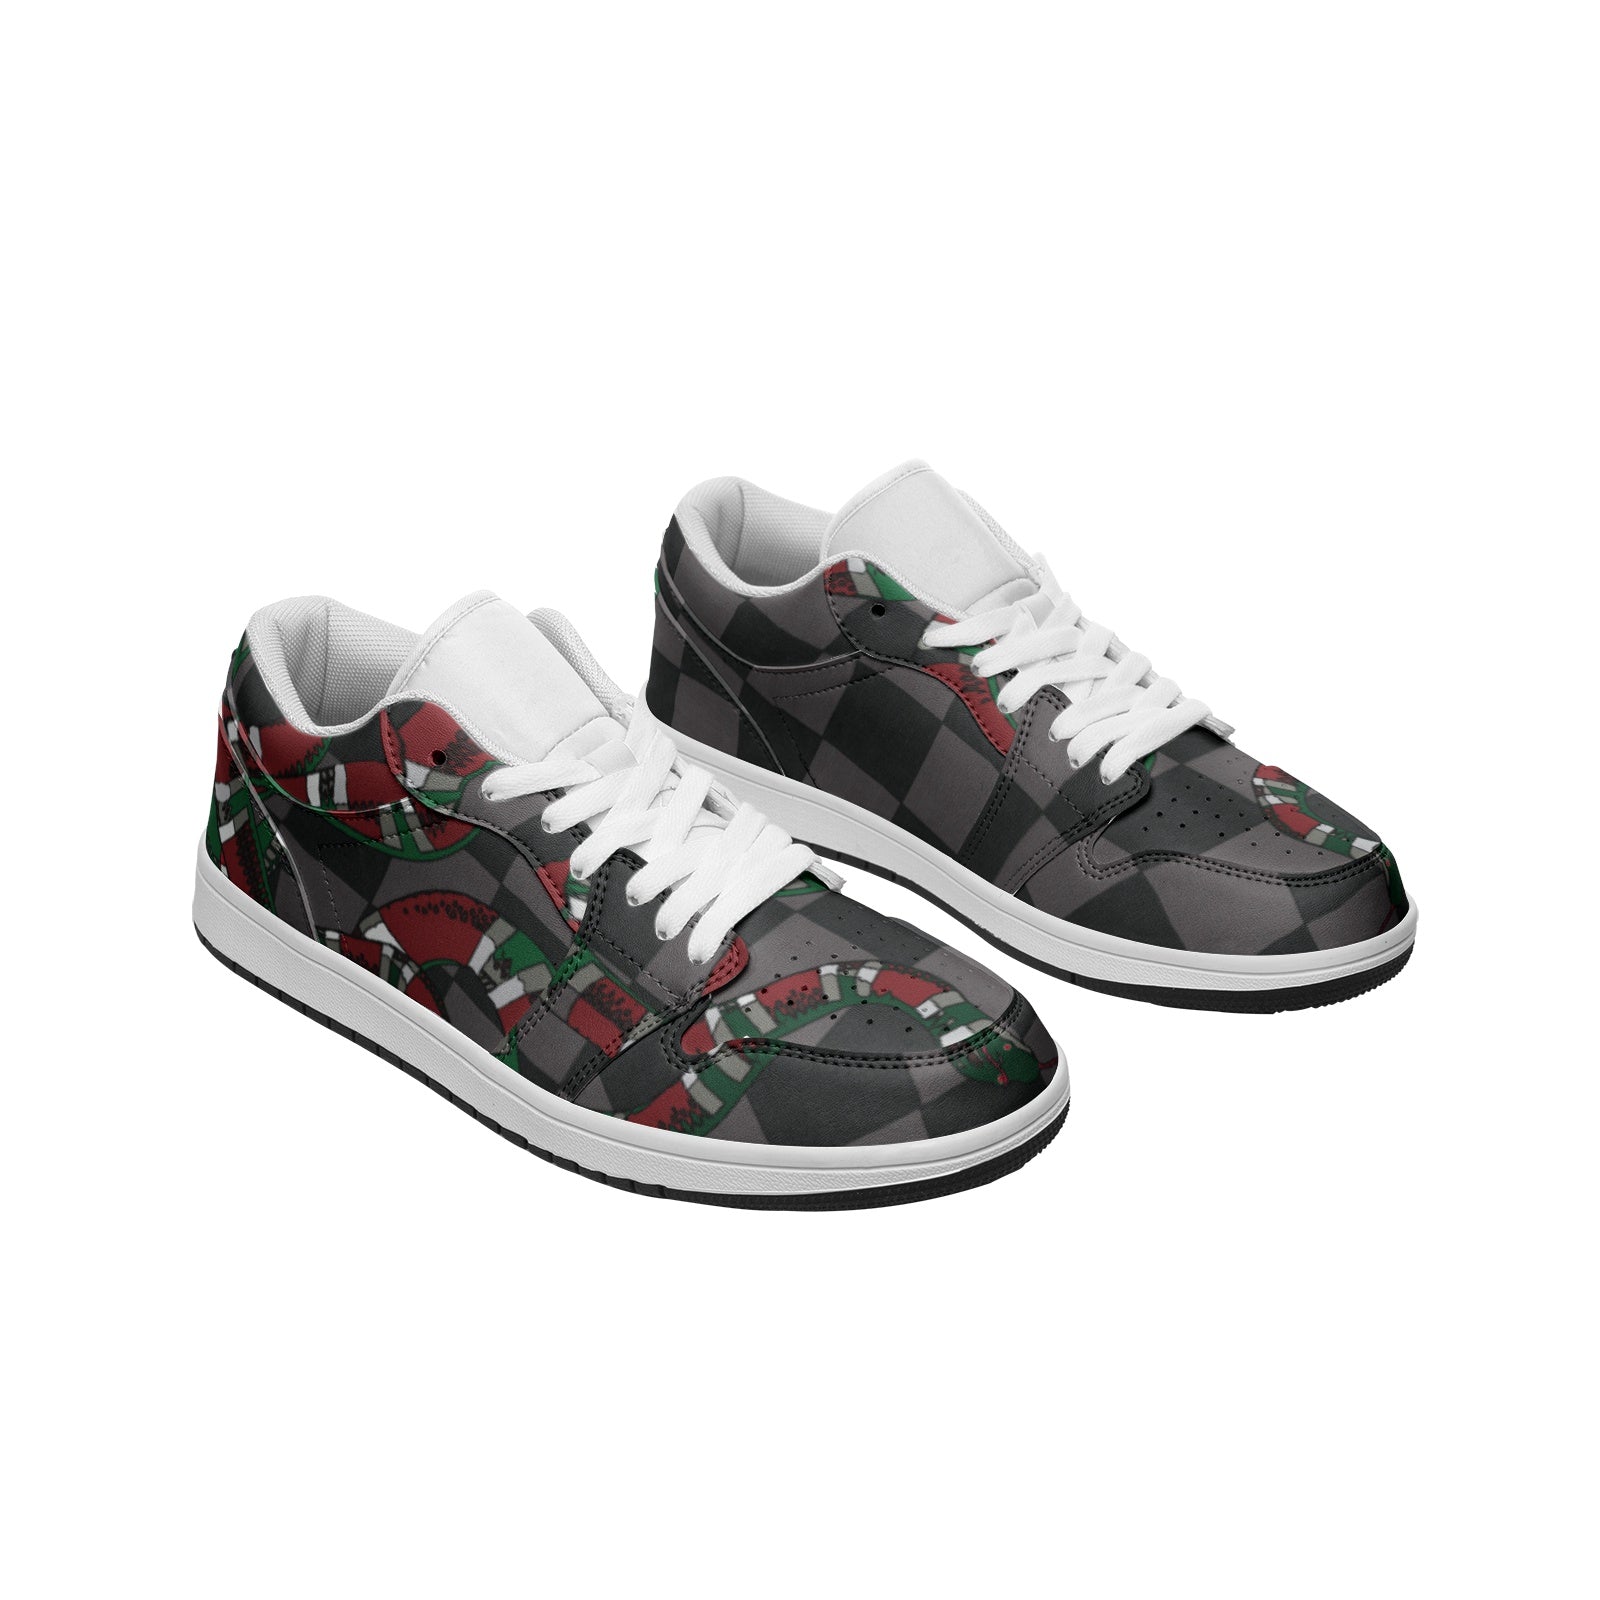 Classic Checkered Designer Snake Low Top Leather Sneakers - HipHatter